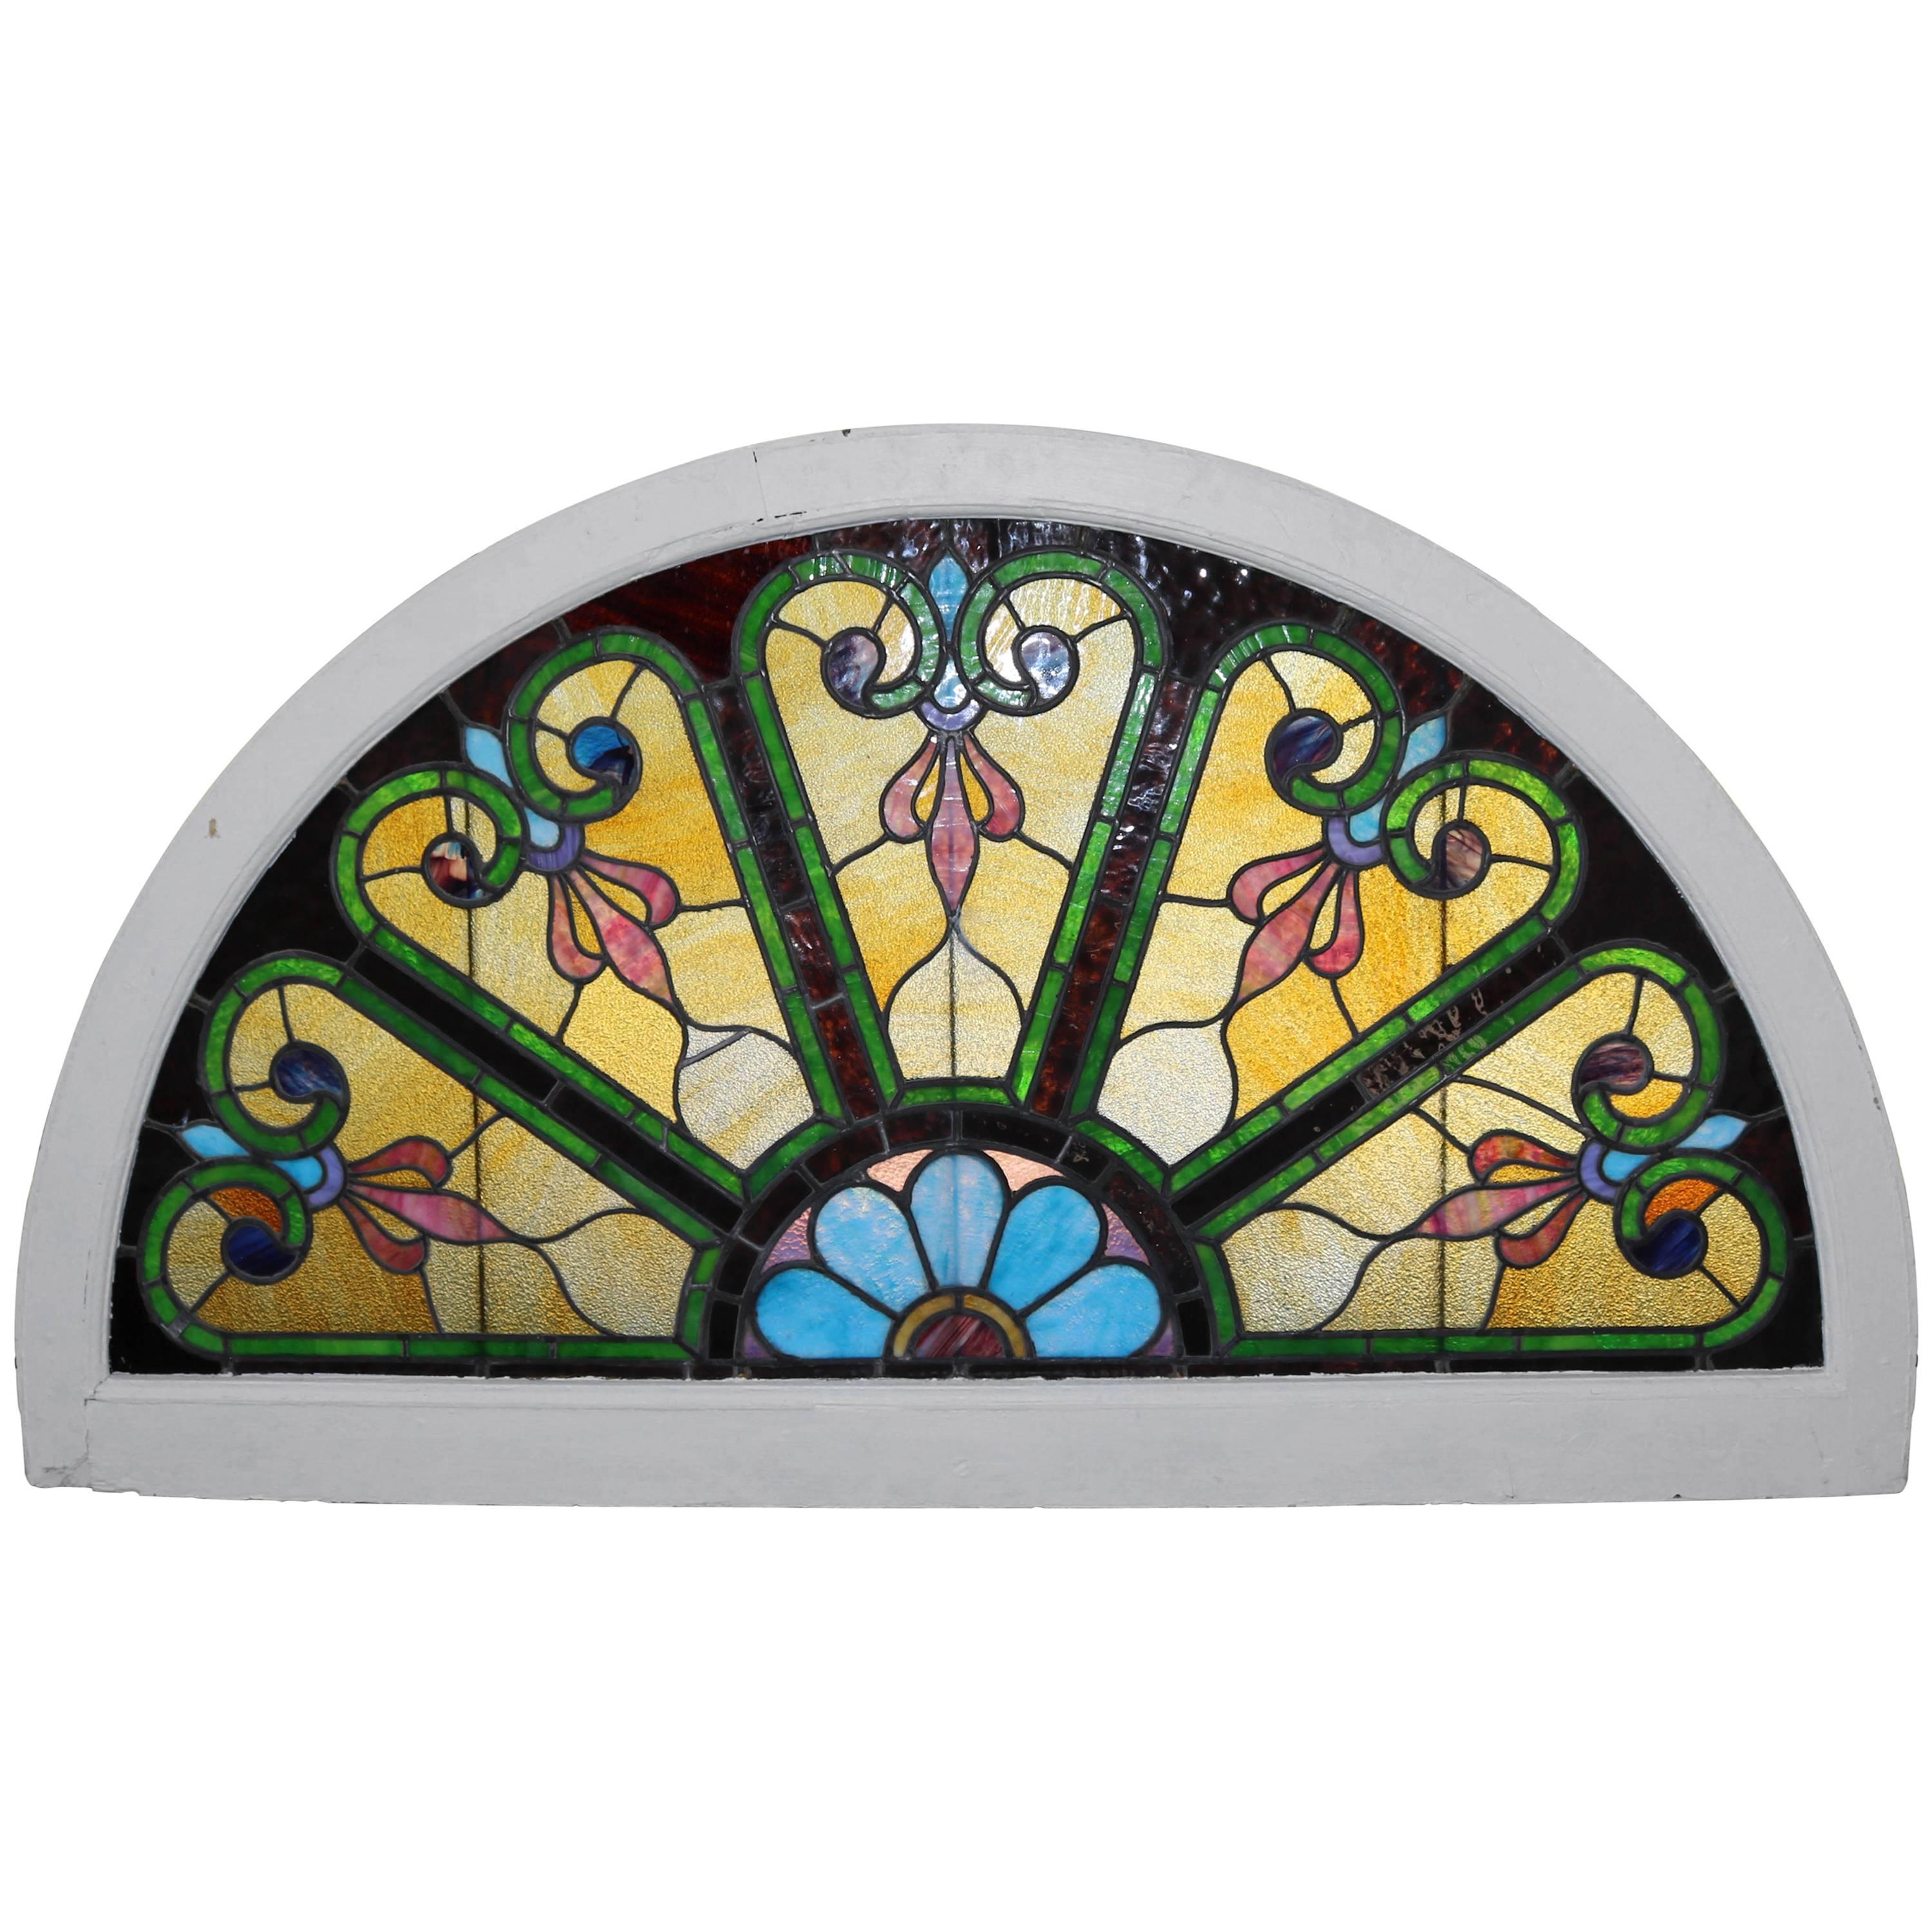 Antique Demilune Stained and Leaded Glass Arched Transom Window